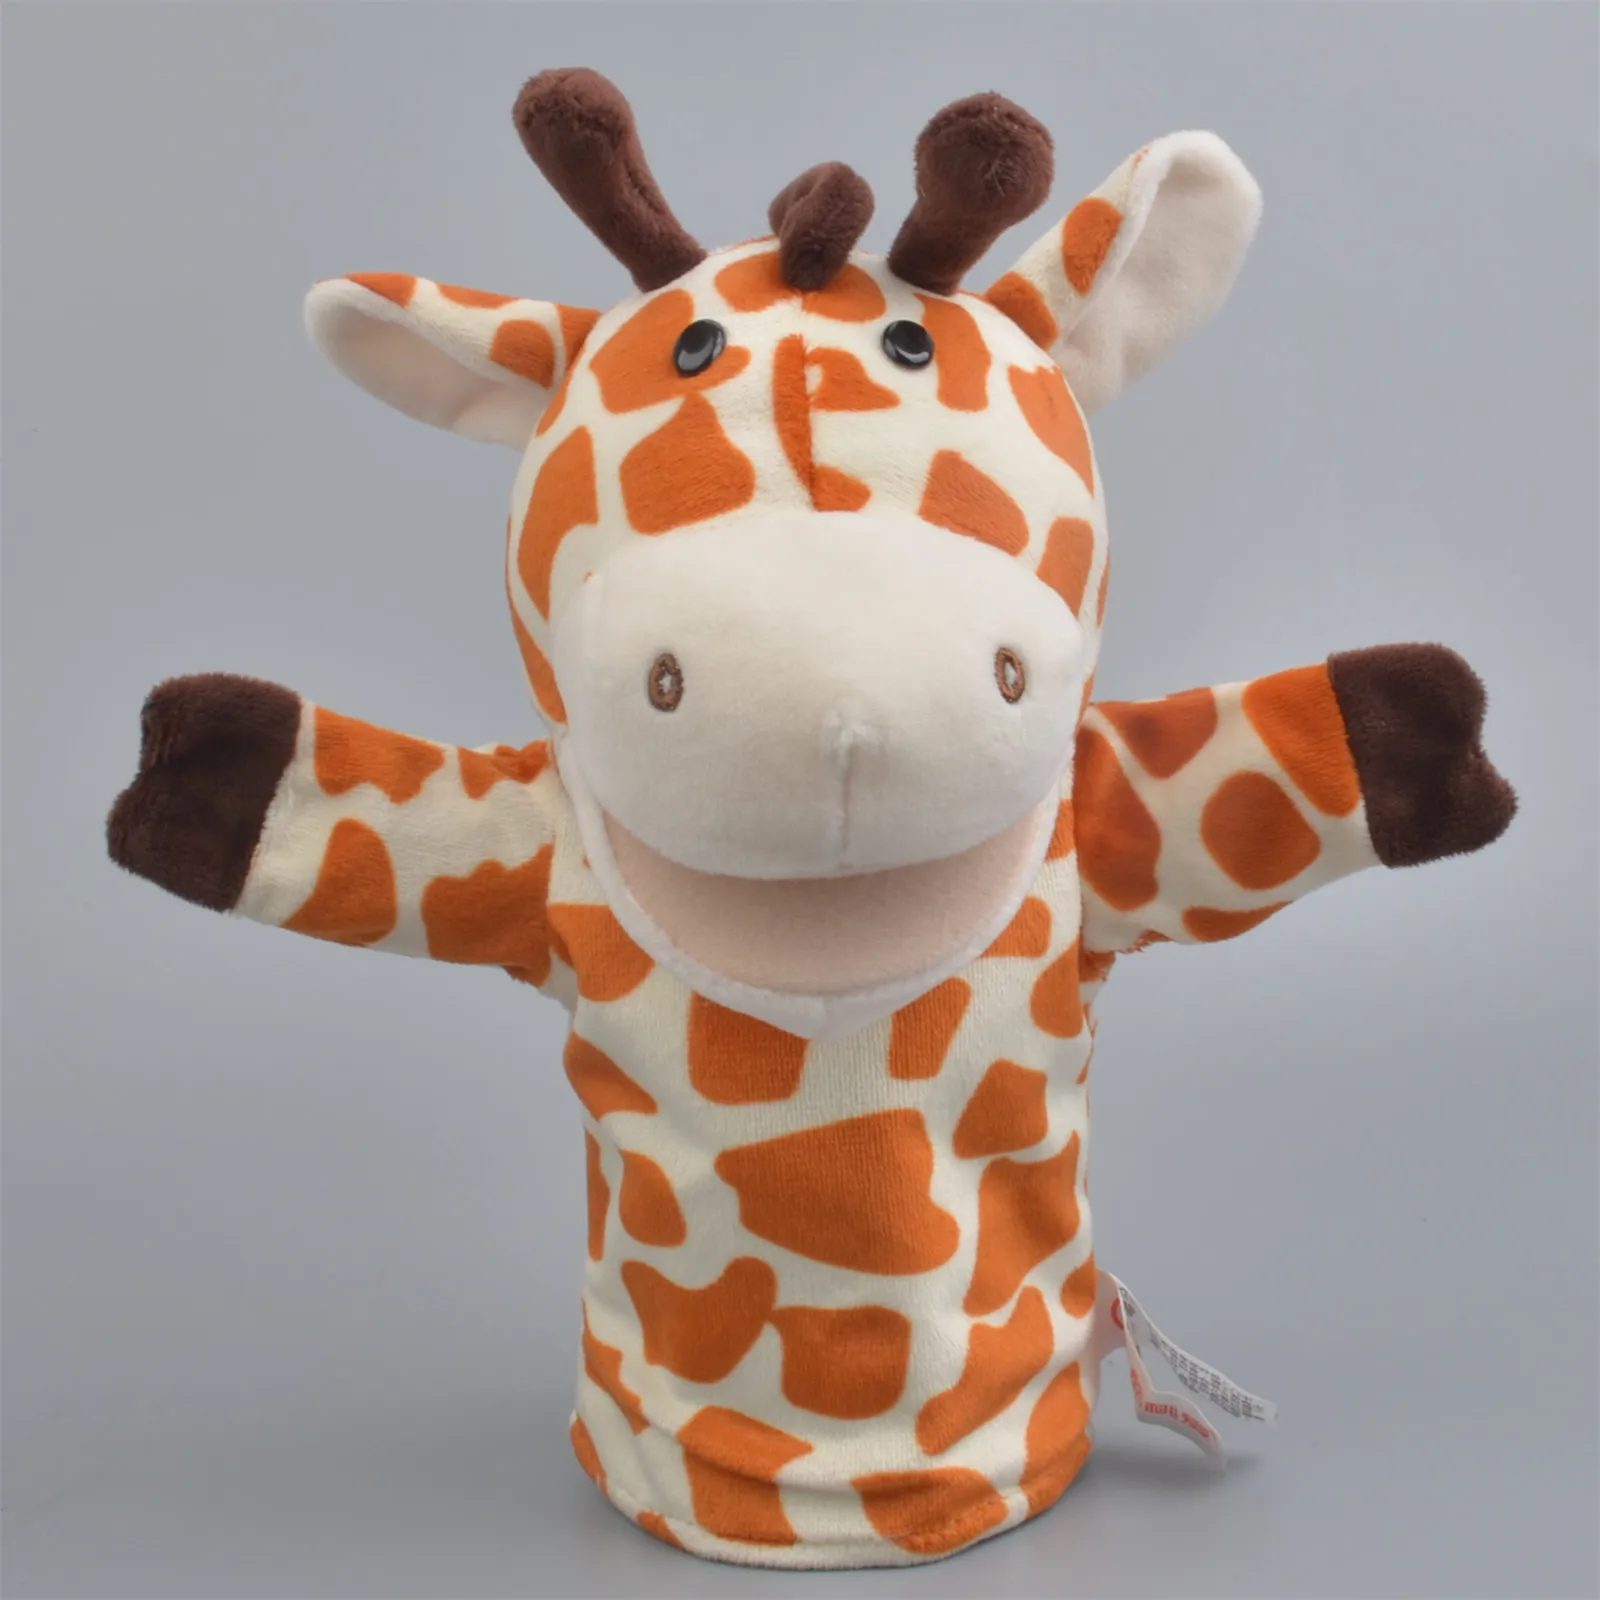 10" Plush Hand Puppet with Movable Open Mouth and Pocket 1SiSi The Giraffe 